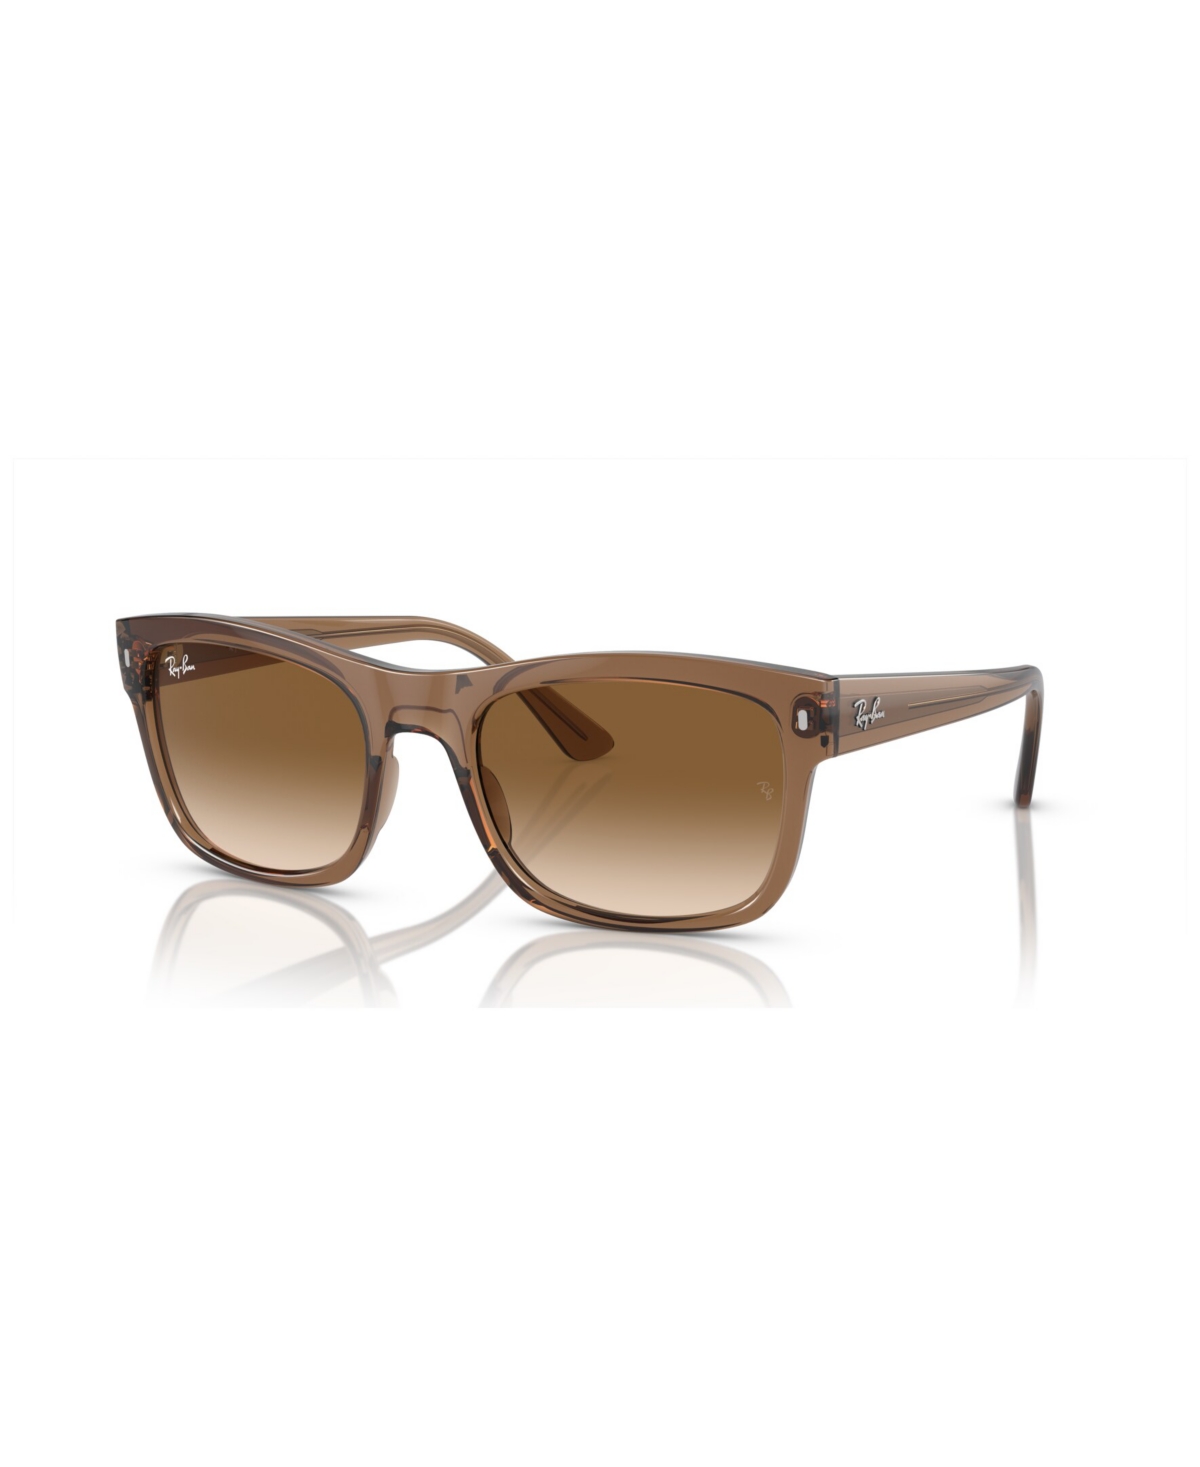 Ray Ban Unisex Sunglasses, Gradient Rb4428 In Transparent Light Brown